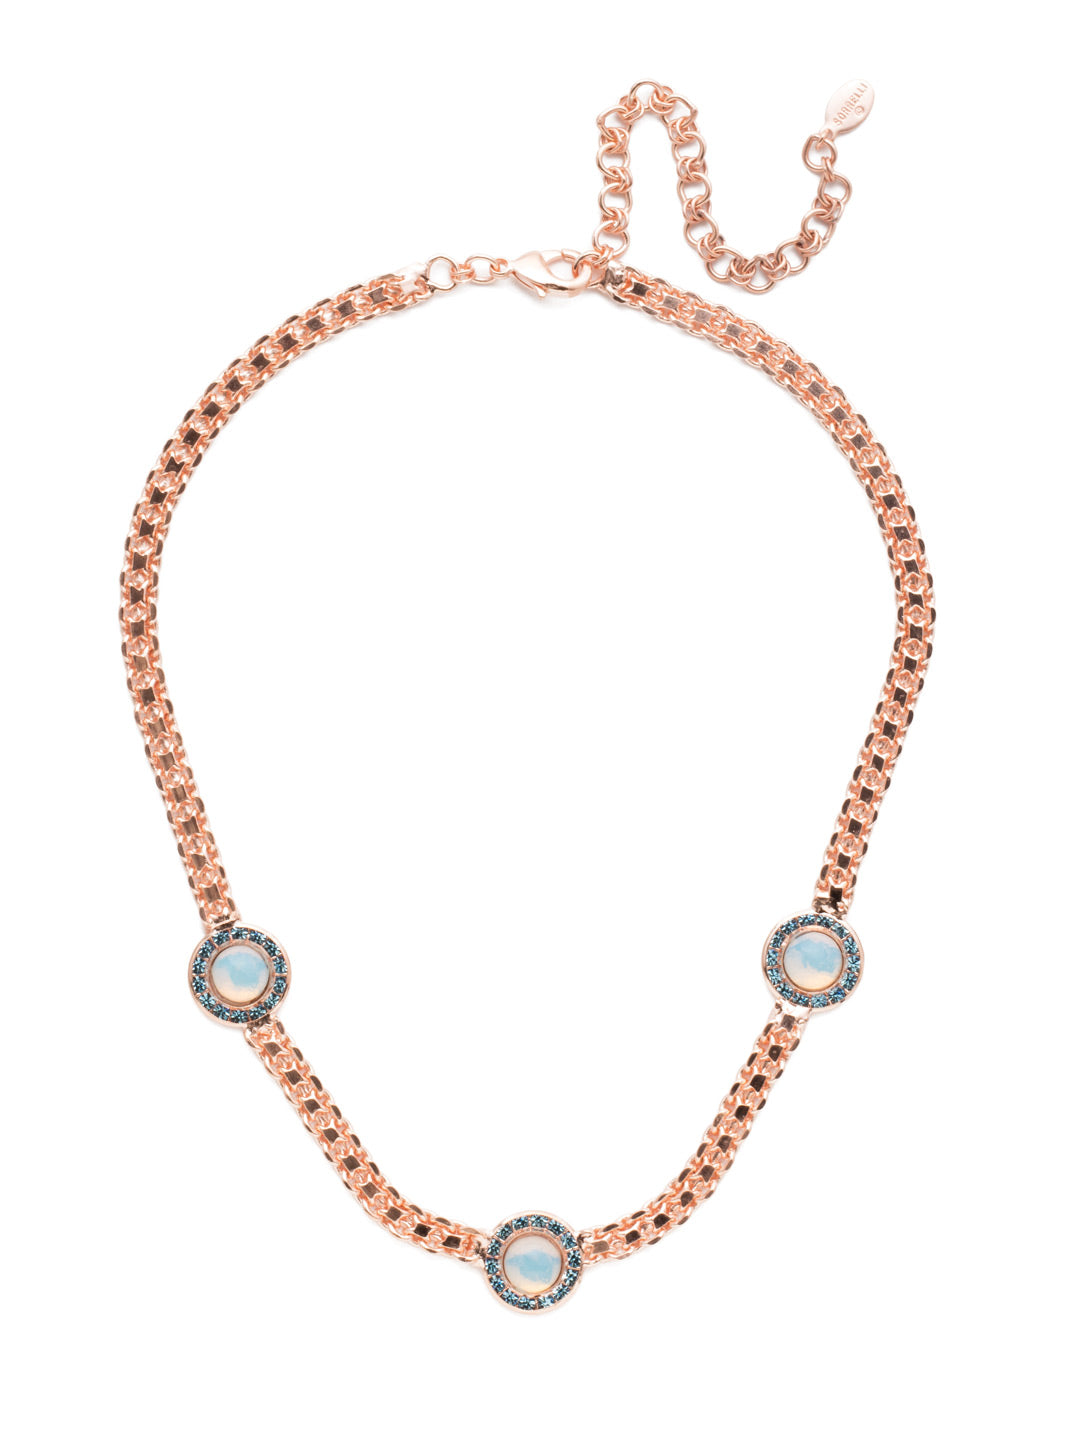 Alberta Tennis Necklace - NET12RGCAZ - <p>Our Alberta Tennis Necklace is for the invidual who appreciates a bold chain but doesn't want to forgo a bit of sparkle. That comes in the form of opaque stones rimmed in shimmering crystals. From Sorrelli's Crystal Azure collection in our Rose Gold-tone finish.</p>